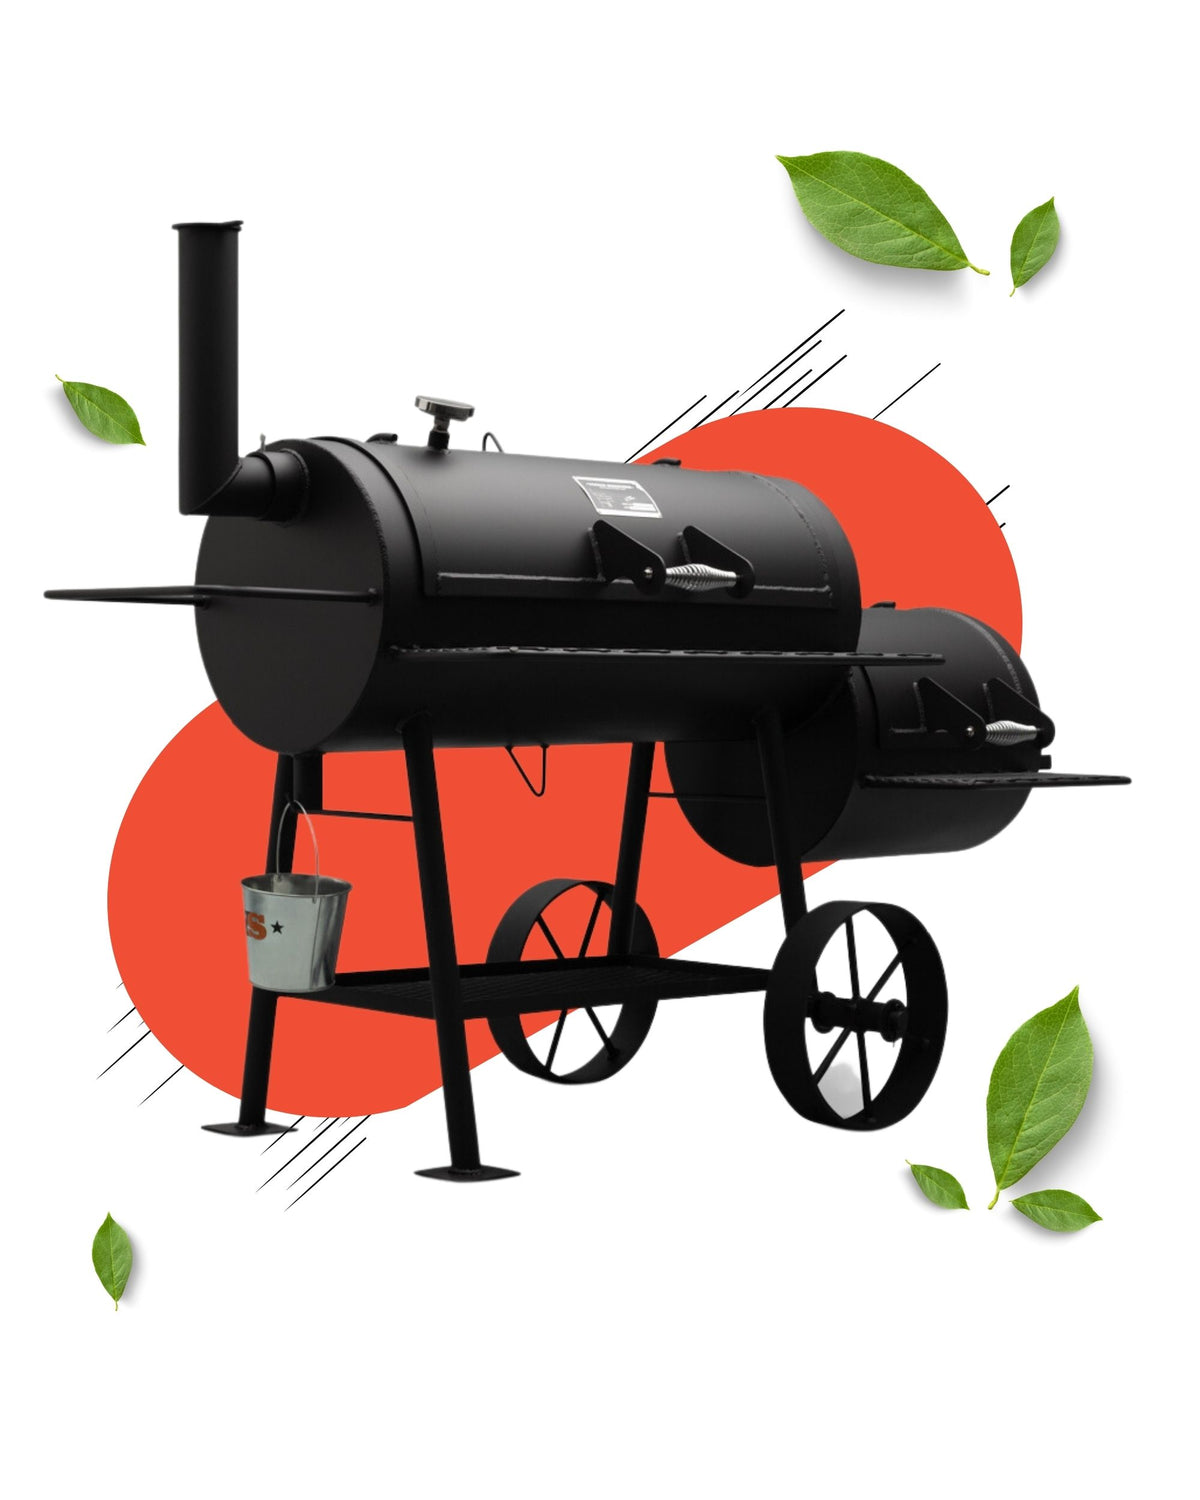 20 Patriot XL Charcoal Grill (*Price does not include Freight Charges.  Please contact us for shipping estimate.) — Horizon Smokers